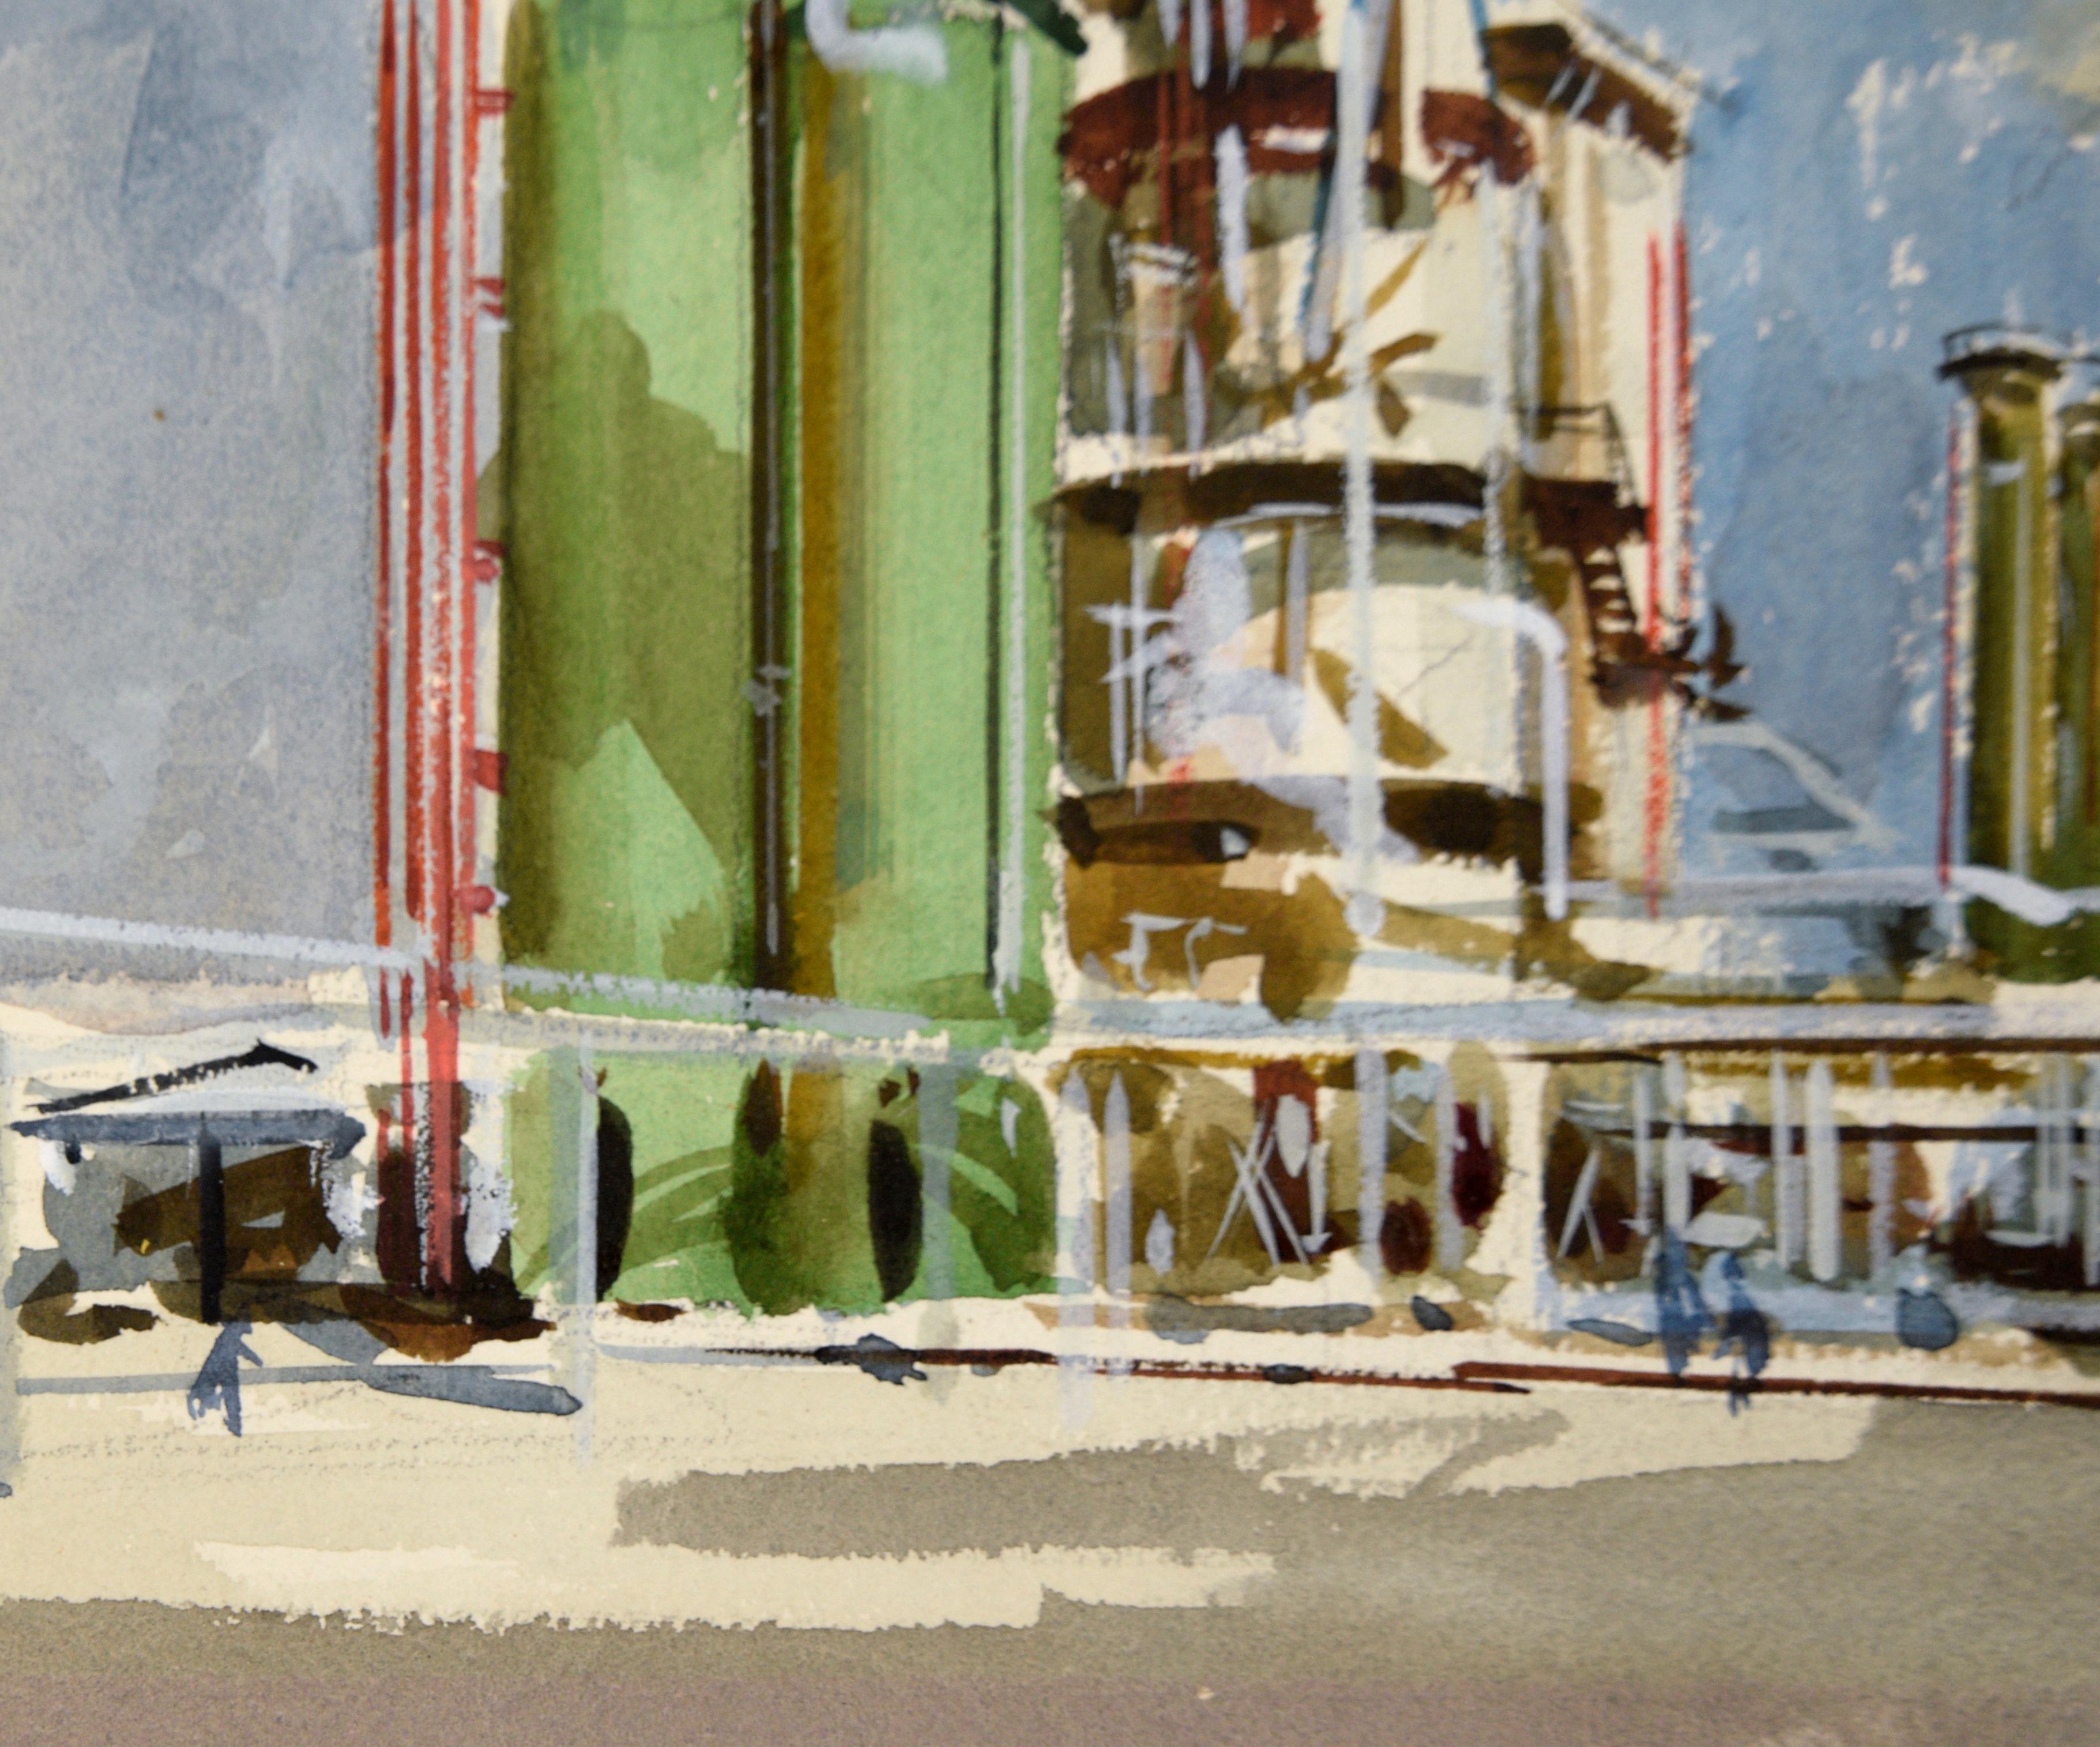 Smokestack at the Refinery - Realistic Industrial Illustration in Gouache - American Impressionist Painting by Charles Kinghan